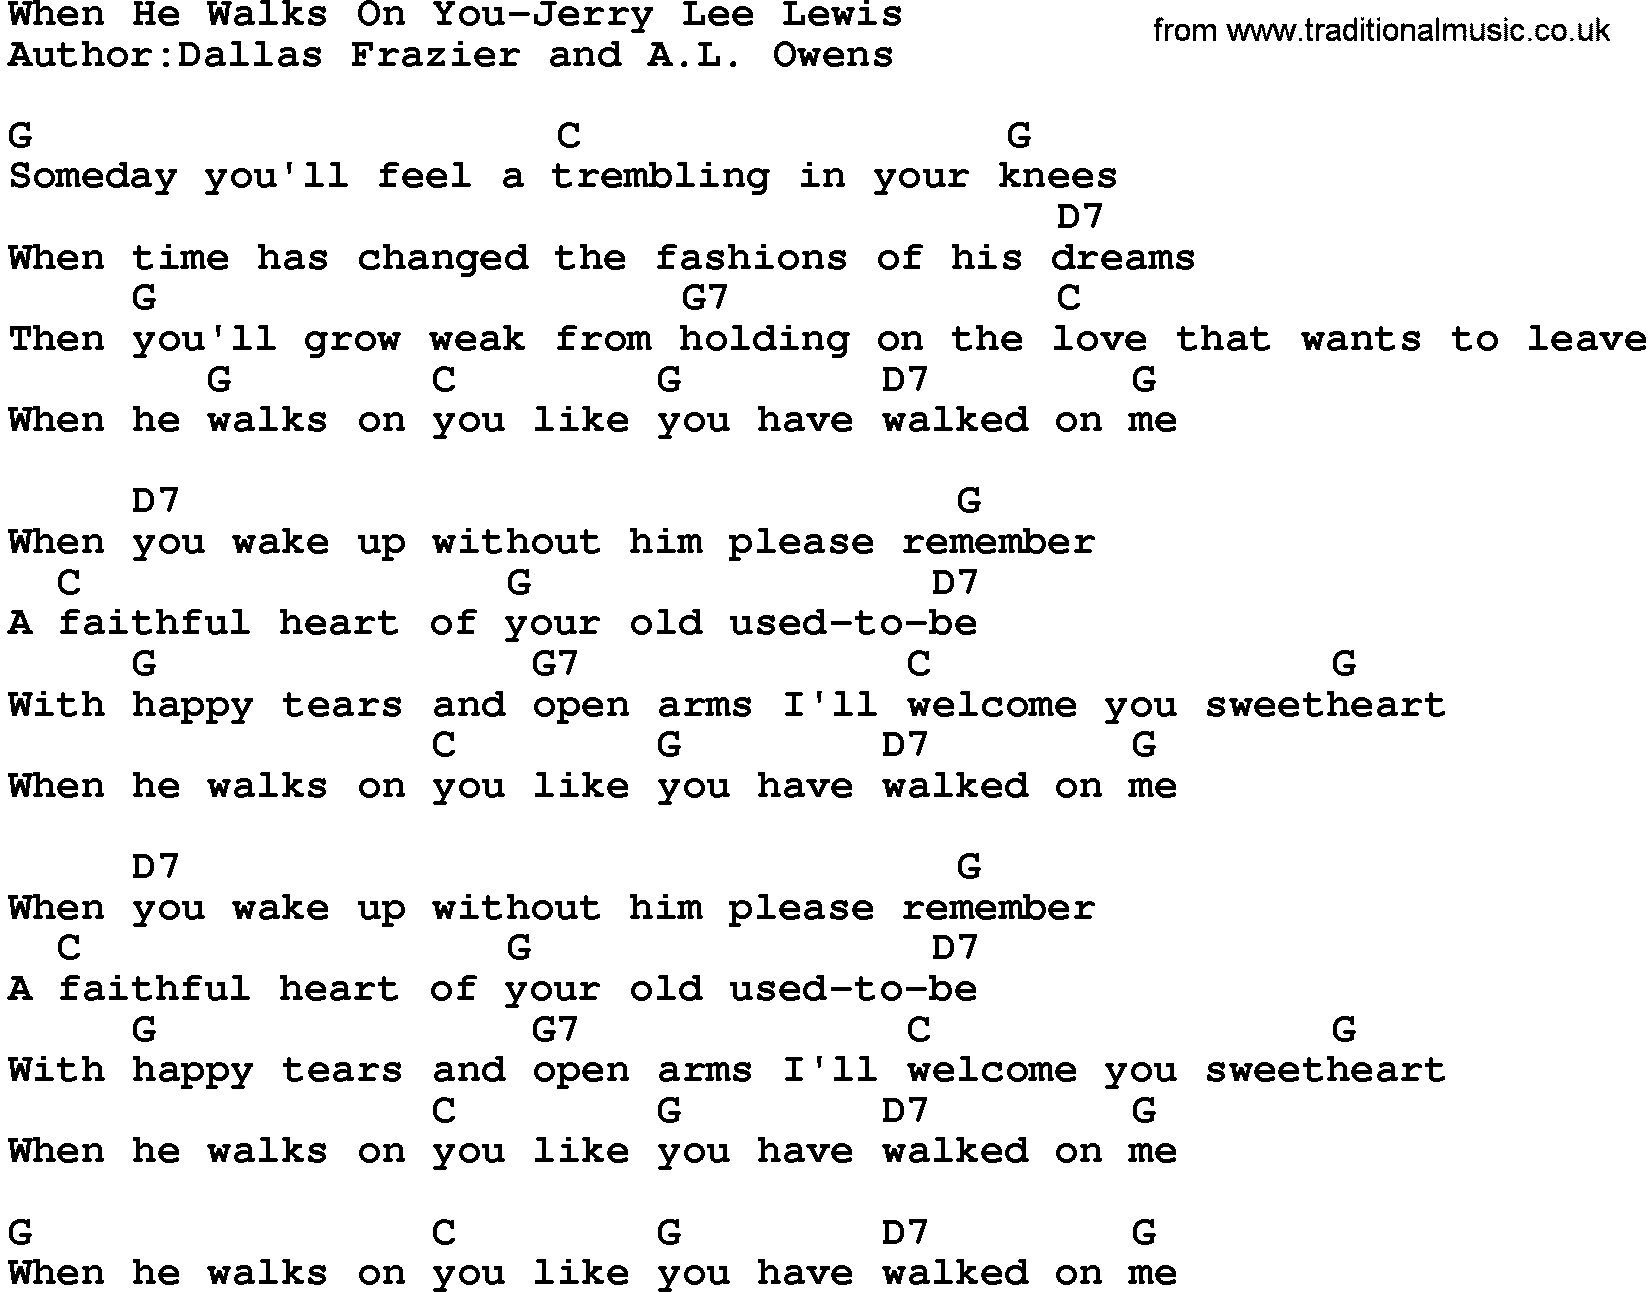 Country music song: When He Walks On You-Jerry Lee Lewis lyrics and chords